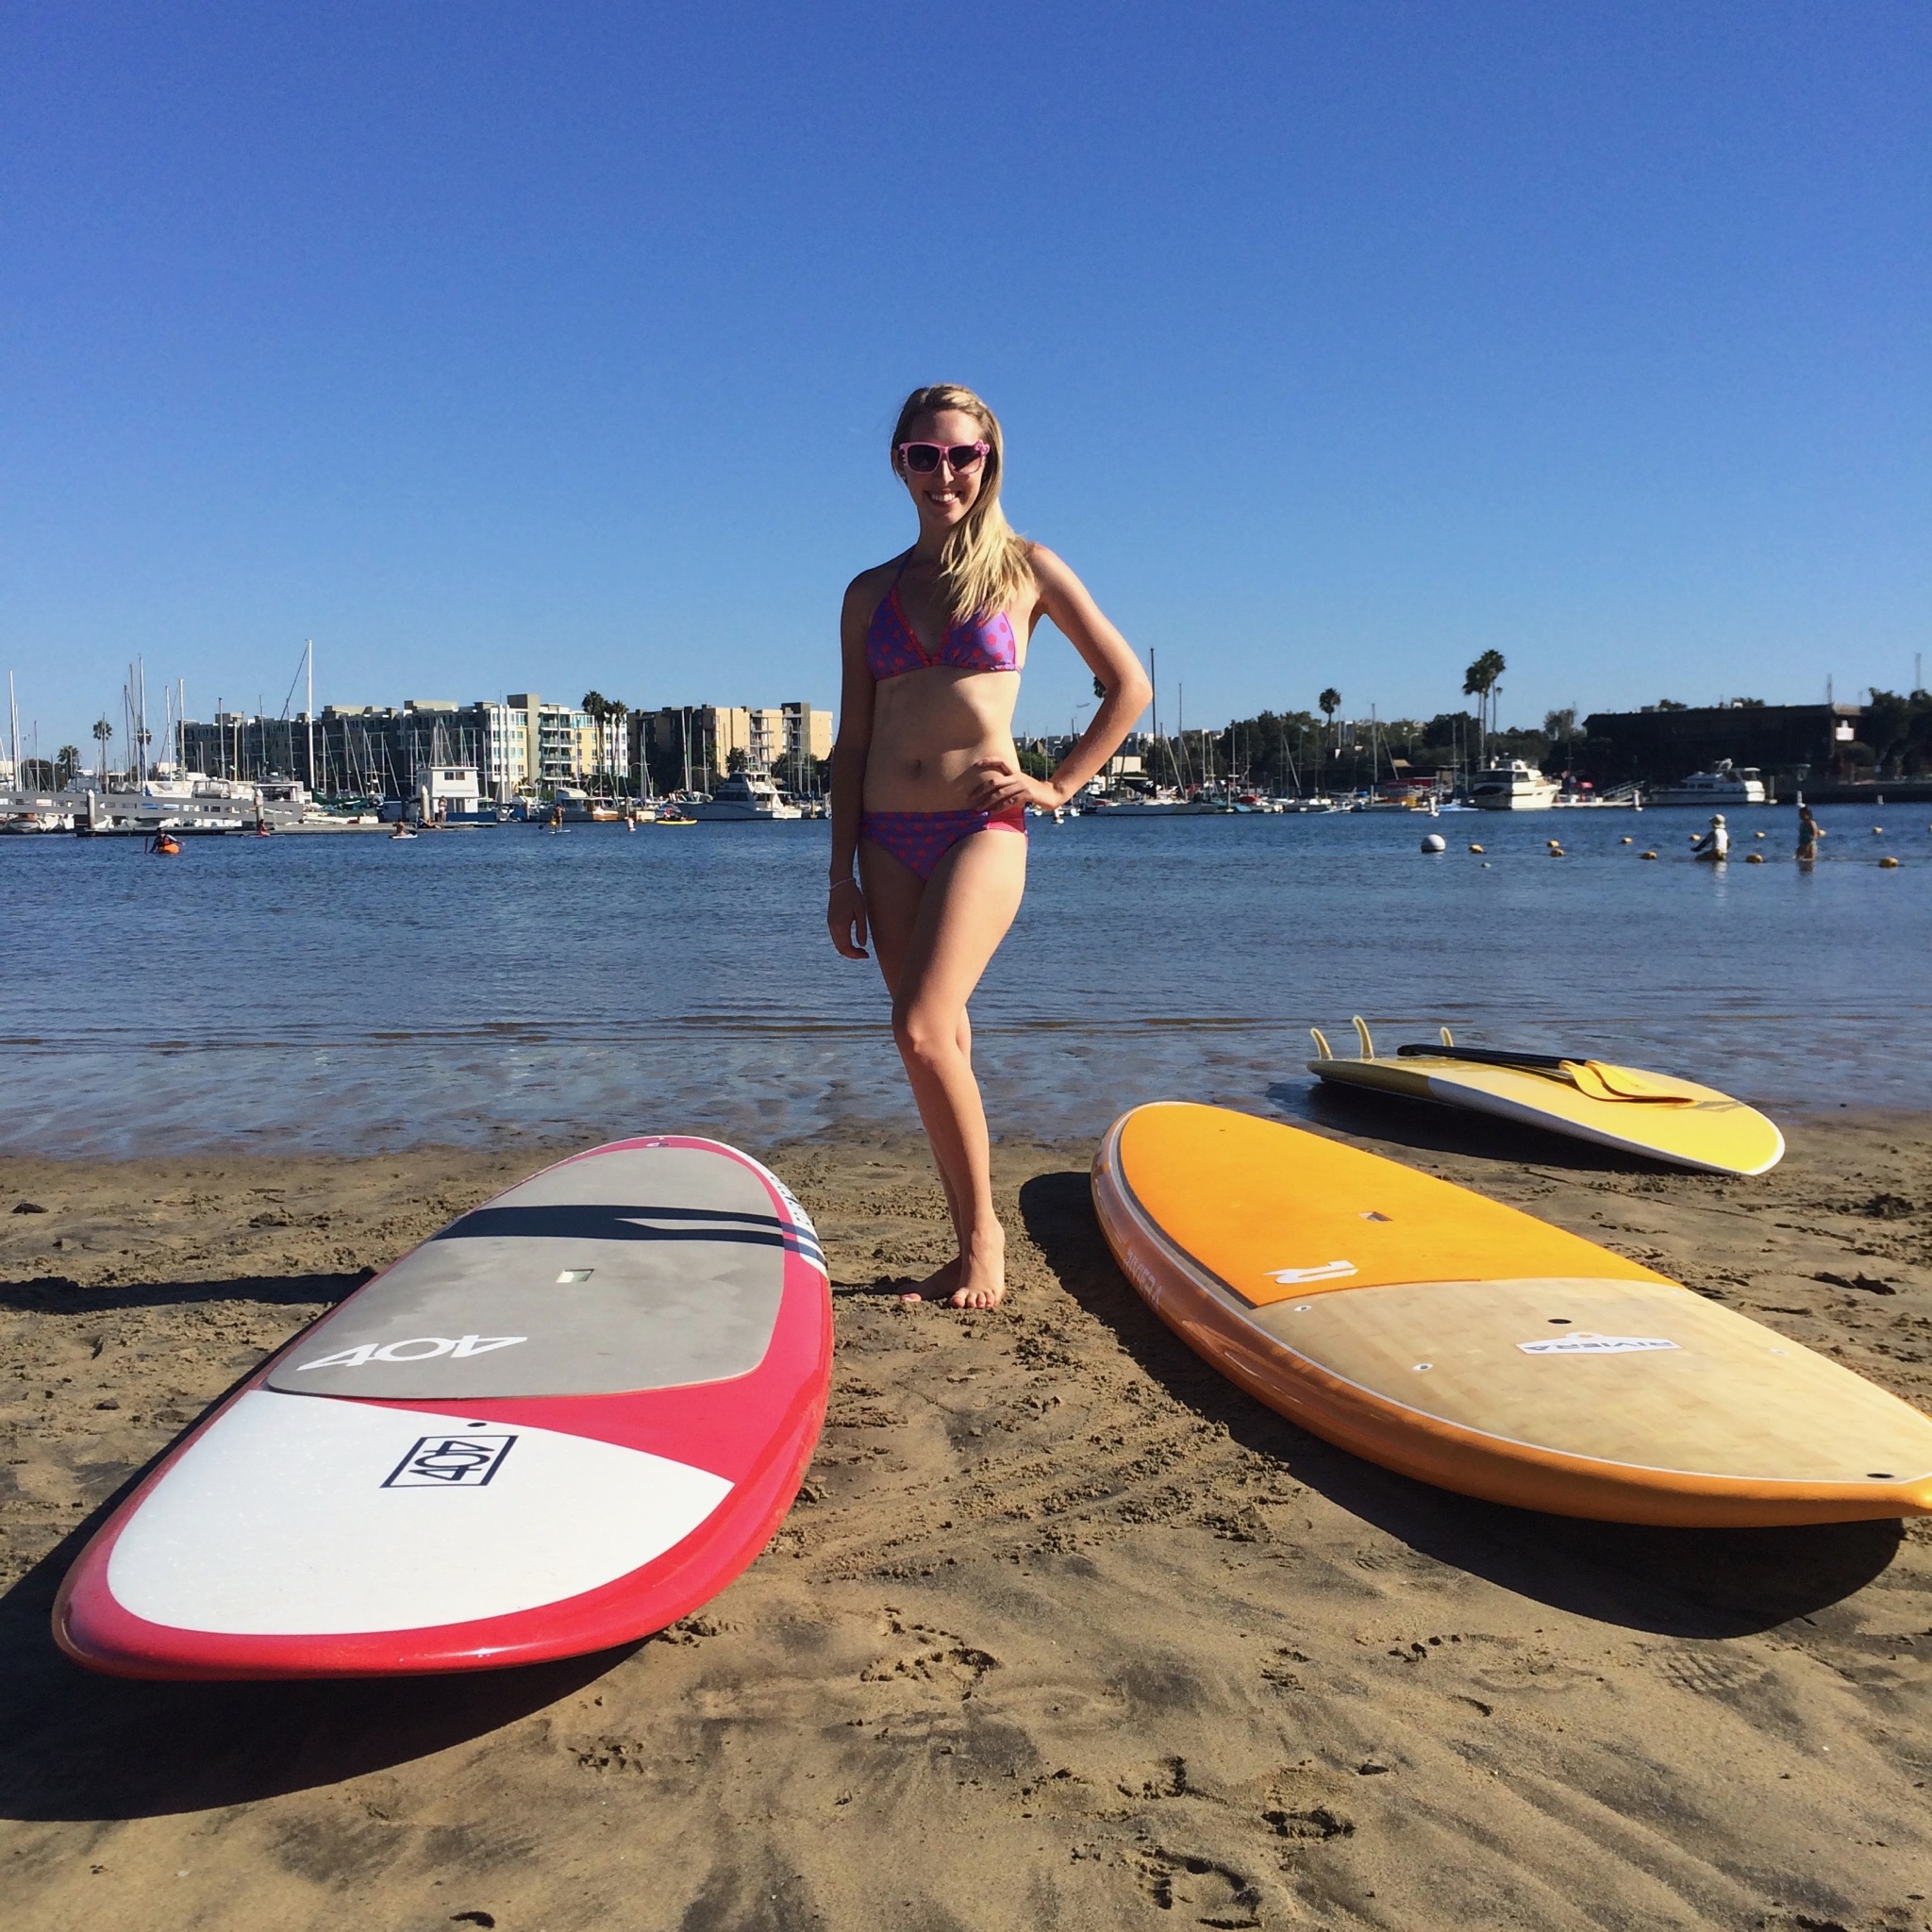 Going stand up paddle boarding for the first time!